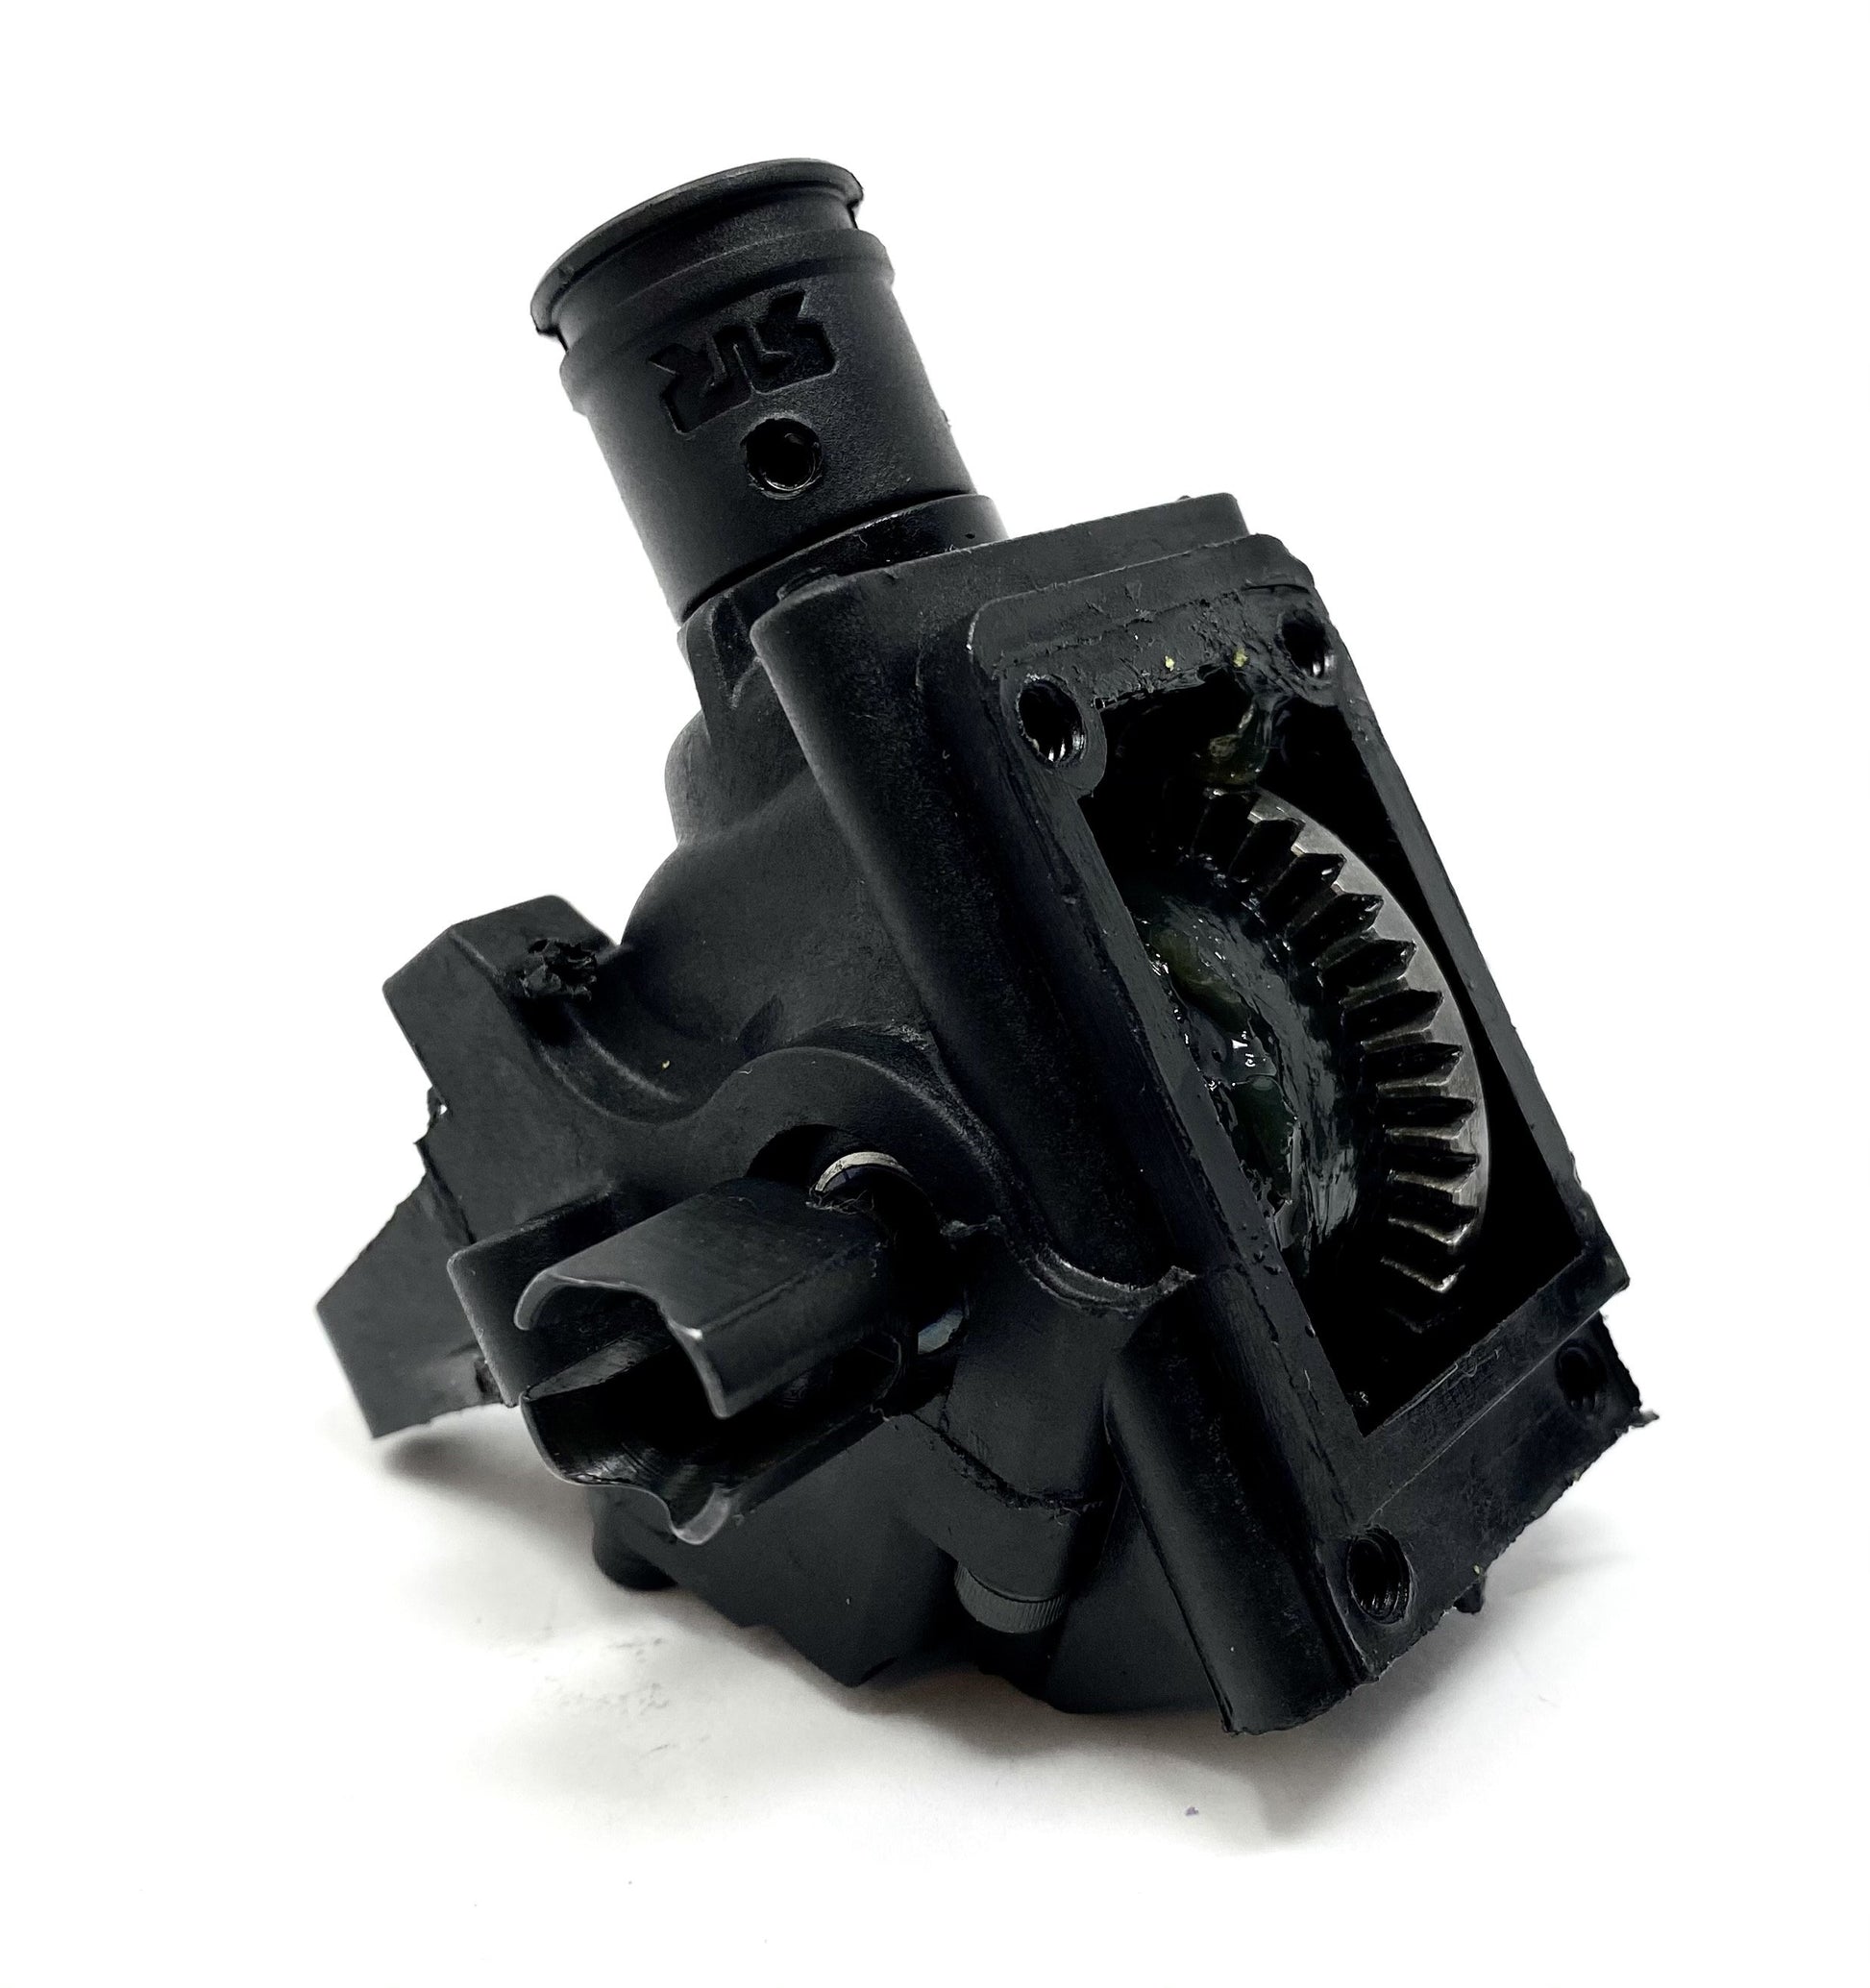 Arrma MOJAVE 6s EXB - FRONT/REAR DIFFERENTIAL GP4 limited Slip kraton ARA7204 - Dirt Cheap RC SAVING YOU MONEY, ONE PART AT A TIME